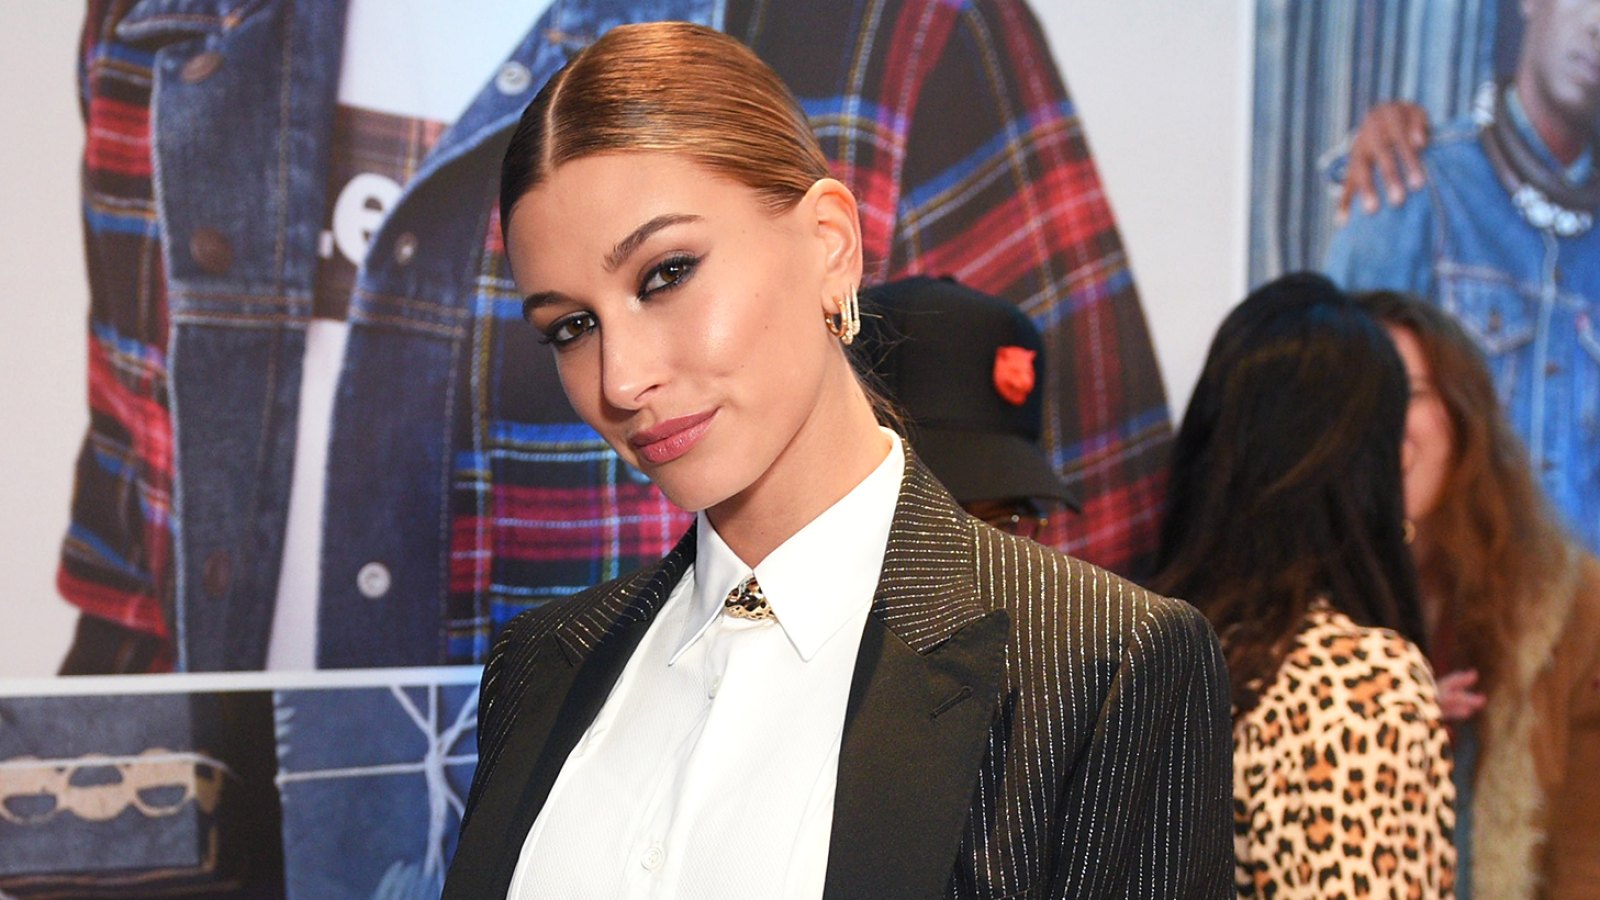 Hailey Baldwin Opens Up About Plans to Have Kids With Justin Bieber: ’I Can’t Wait to Have My Own’